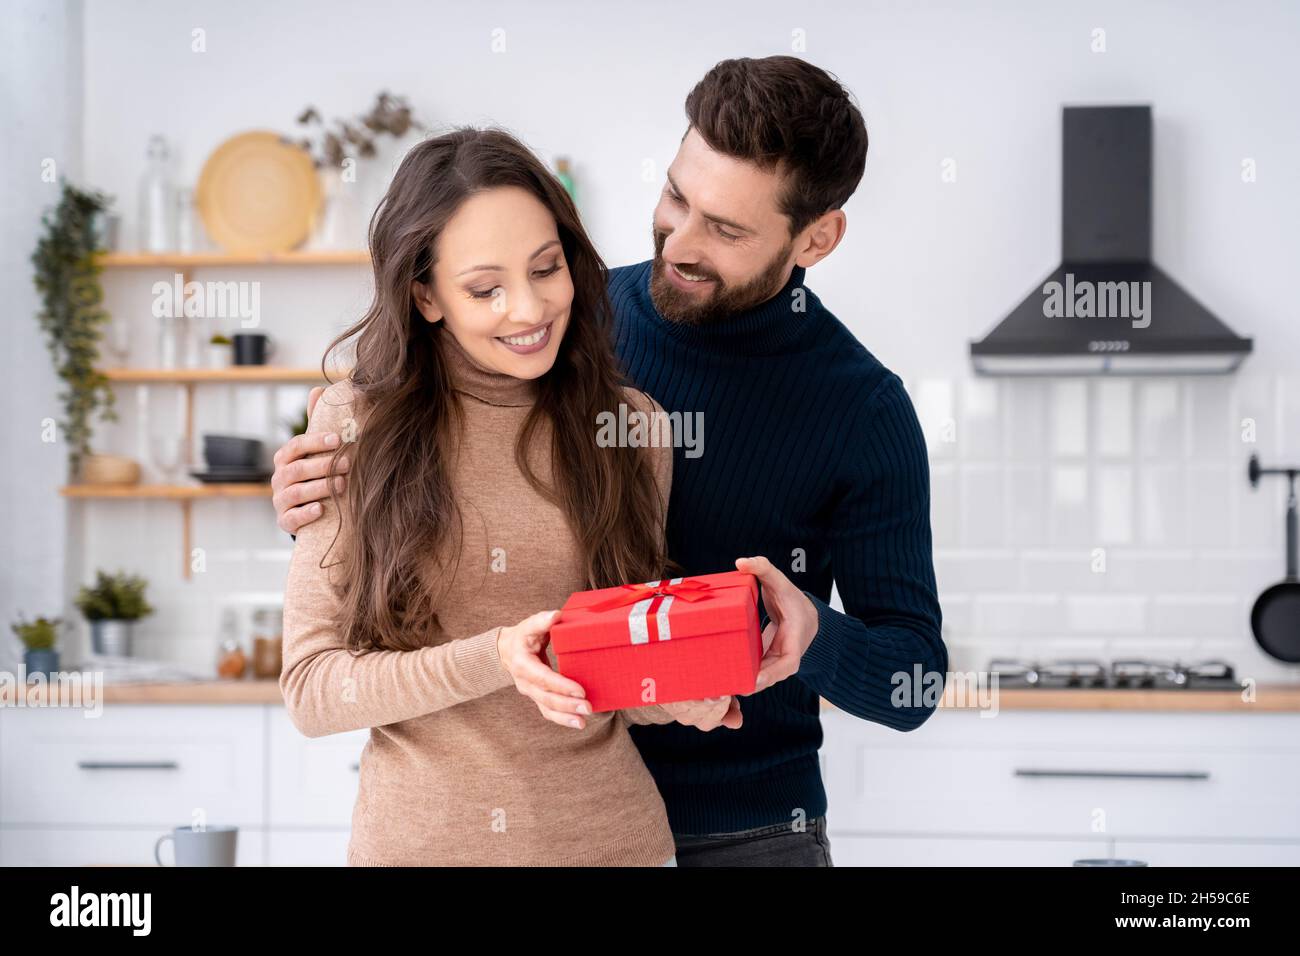 Loving husband surprising charming wife with present gift box on romantic day Stock Photo